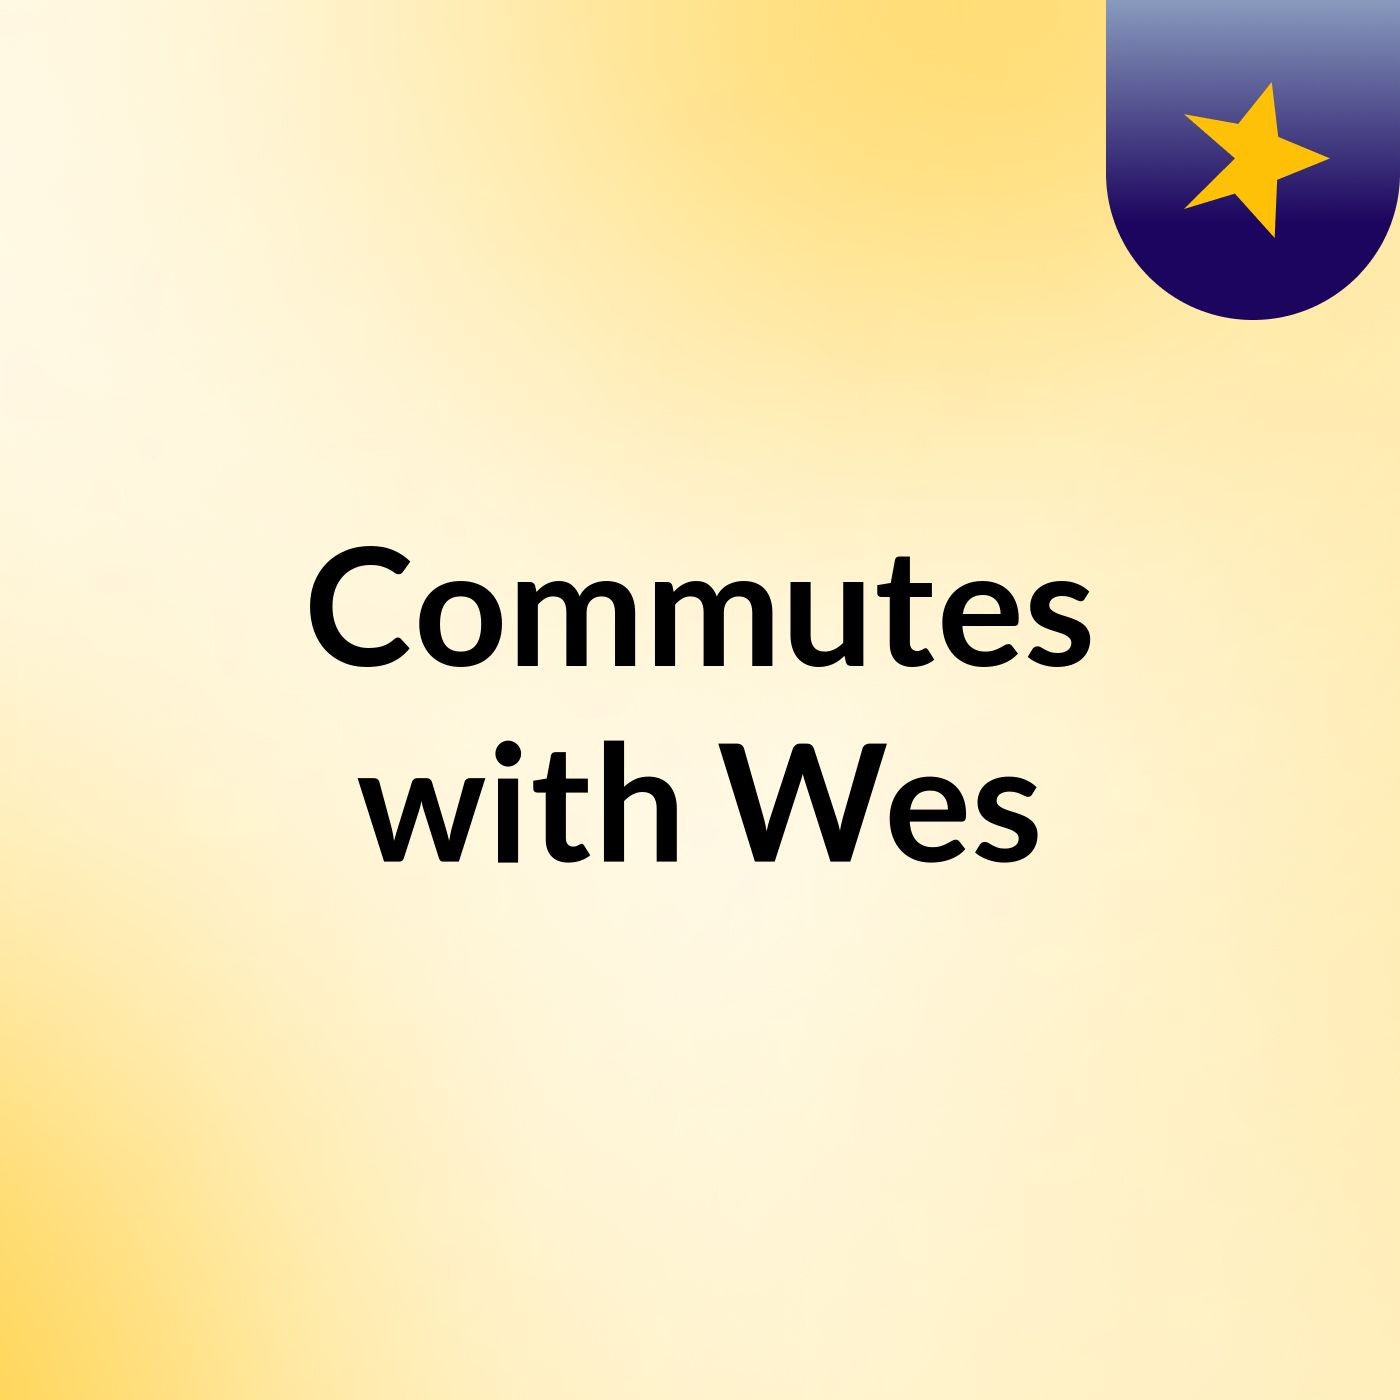 Commutes with Wes